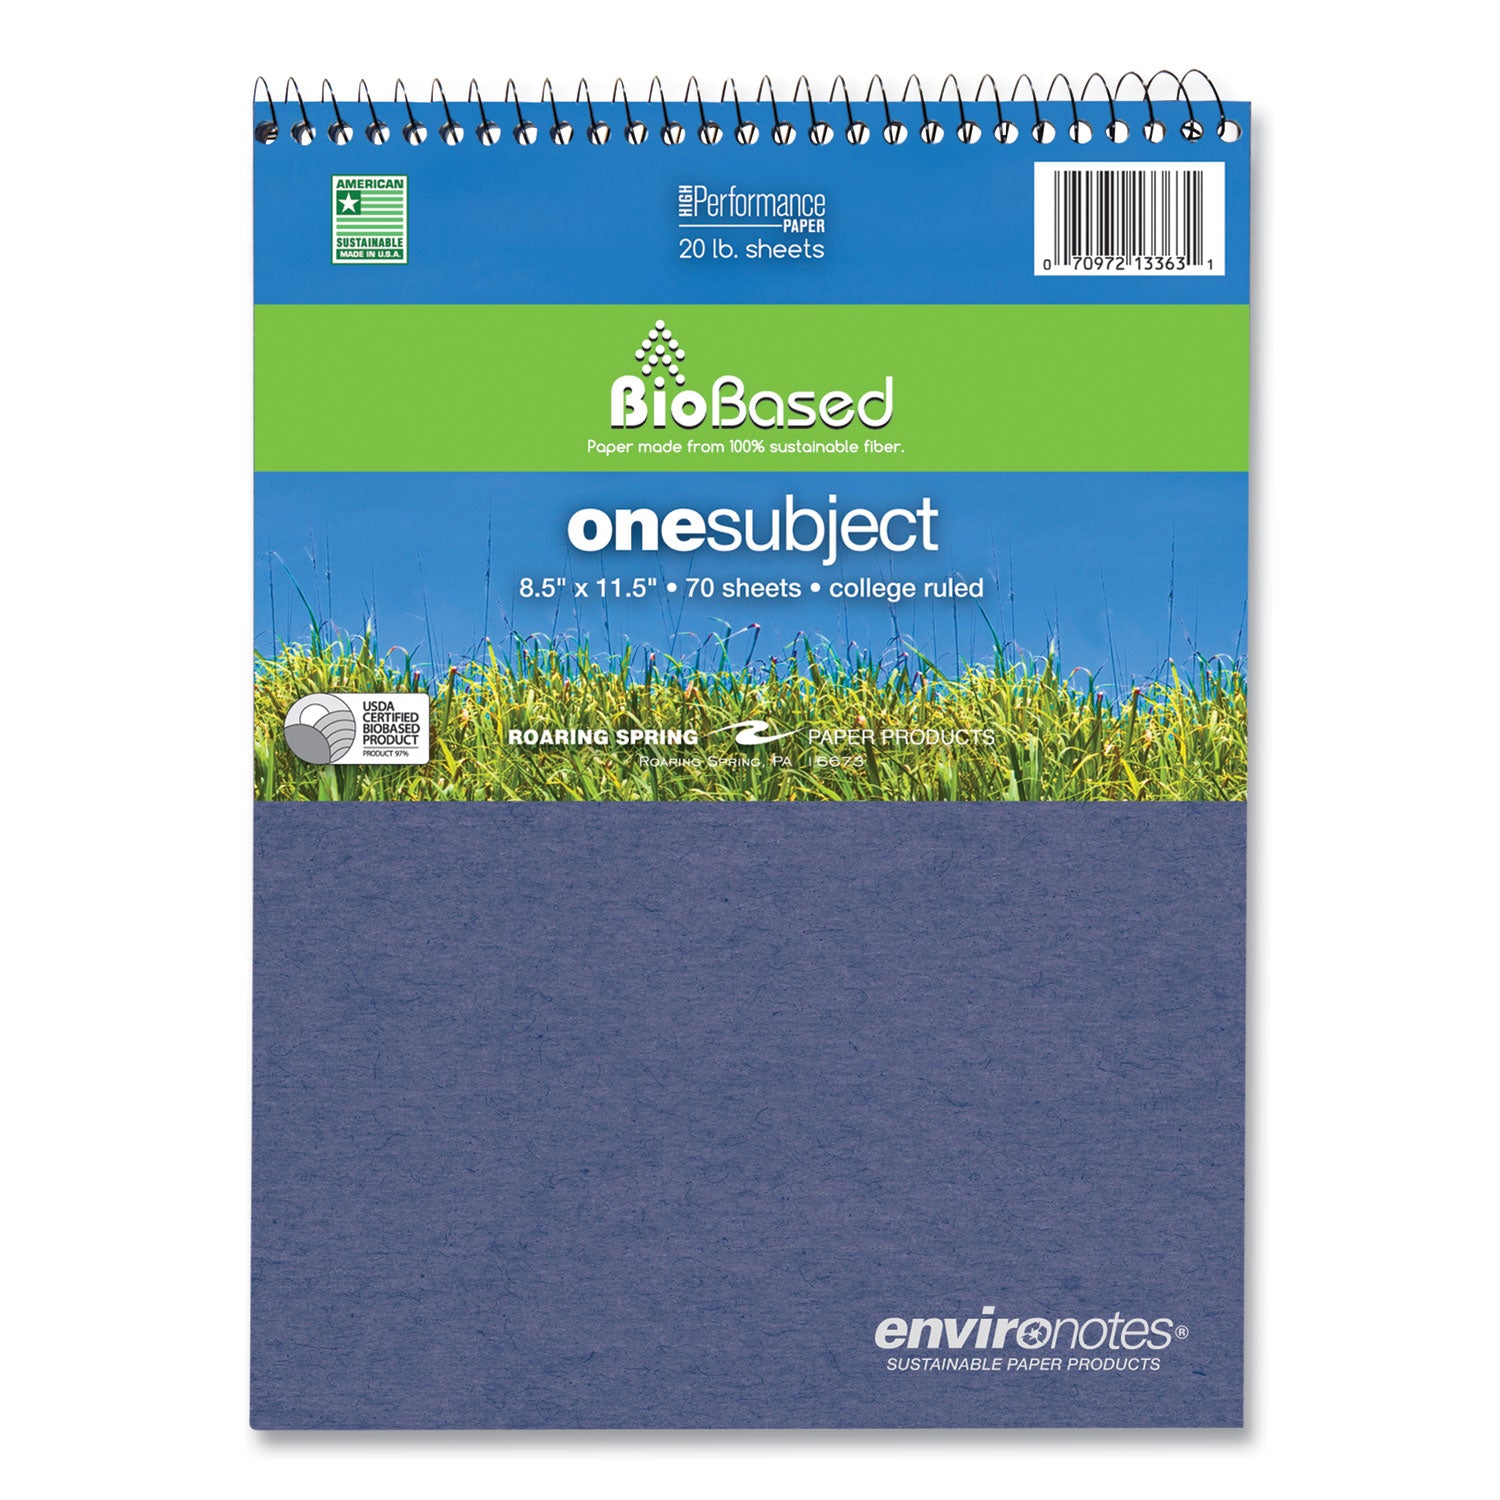 earthtones-biobased-1-subject-notebook-med-college-rule-asst-covers-70-85x115-sheets-24-ct-ships-in-4-6-bus-days_roa13363cs - 2